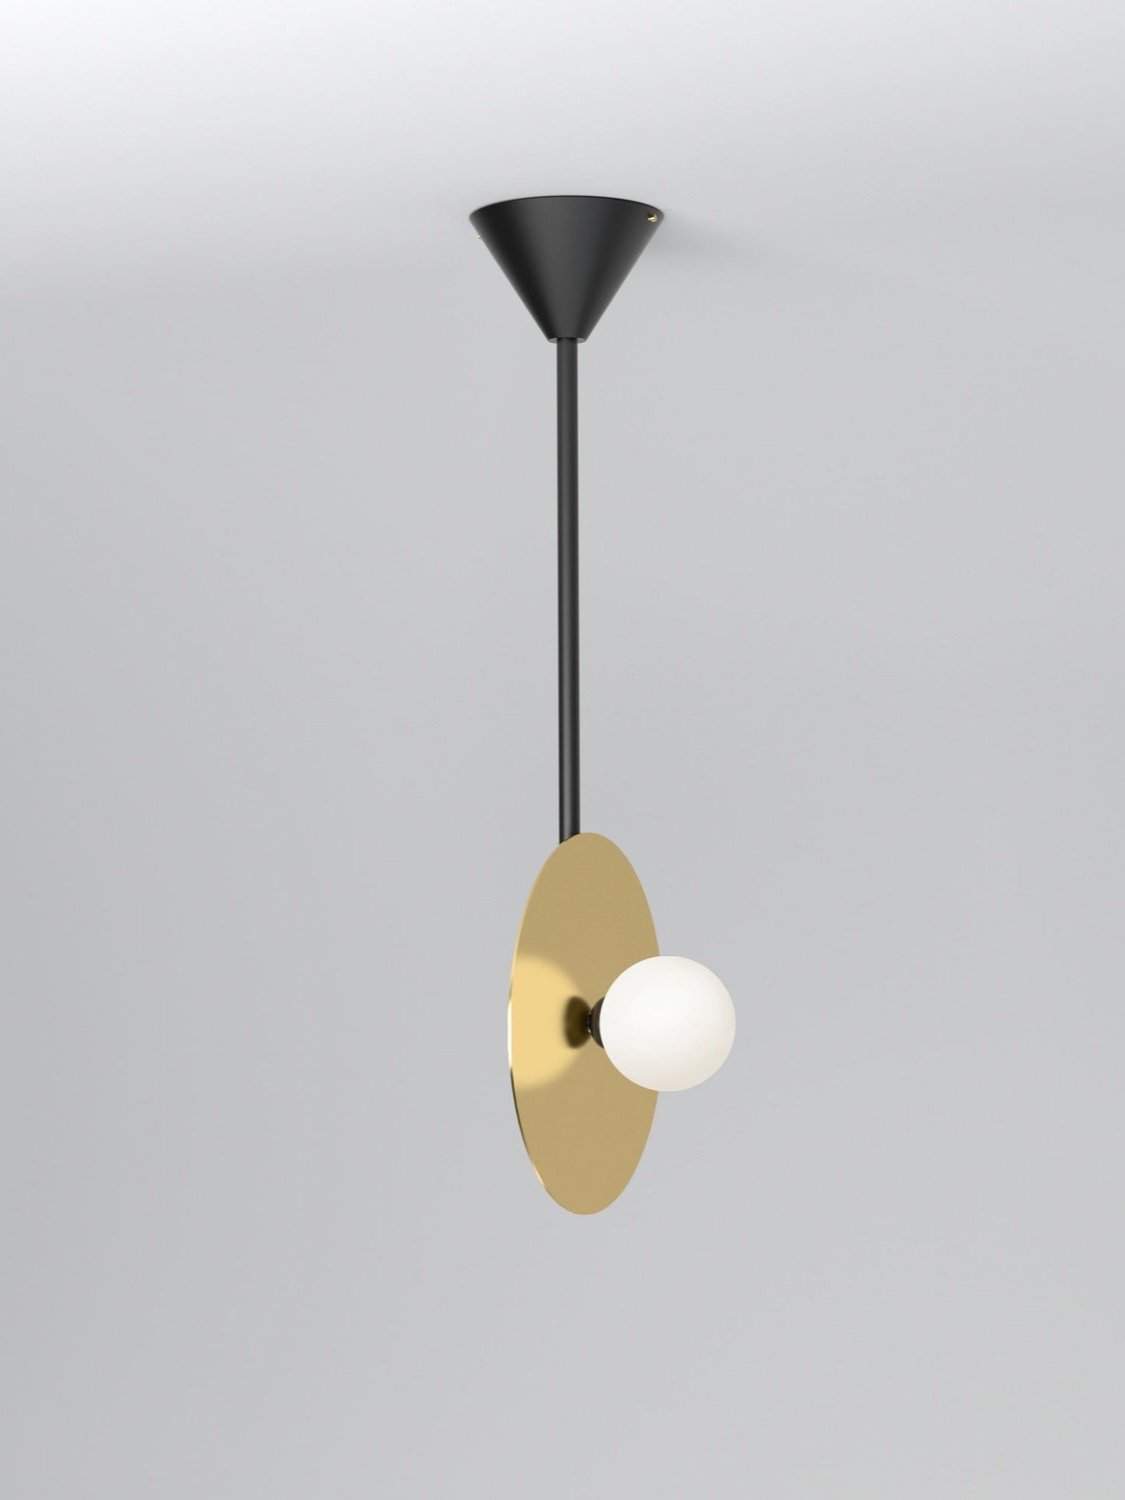 DISC AND SPHERE PENDANT LIGHT / VERTICAL - 1 DISC / CONE ATTACHMENT